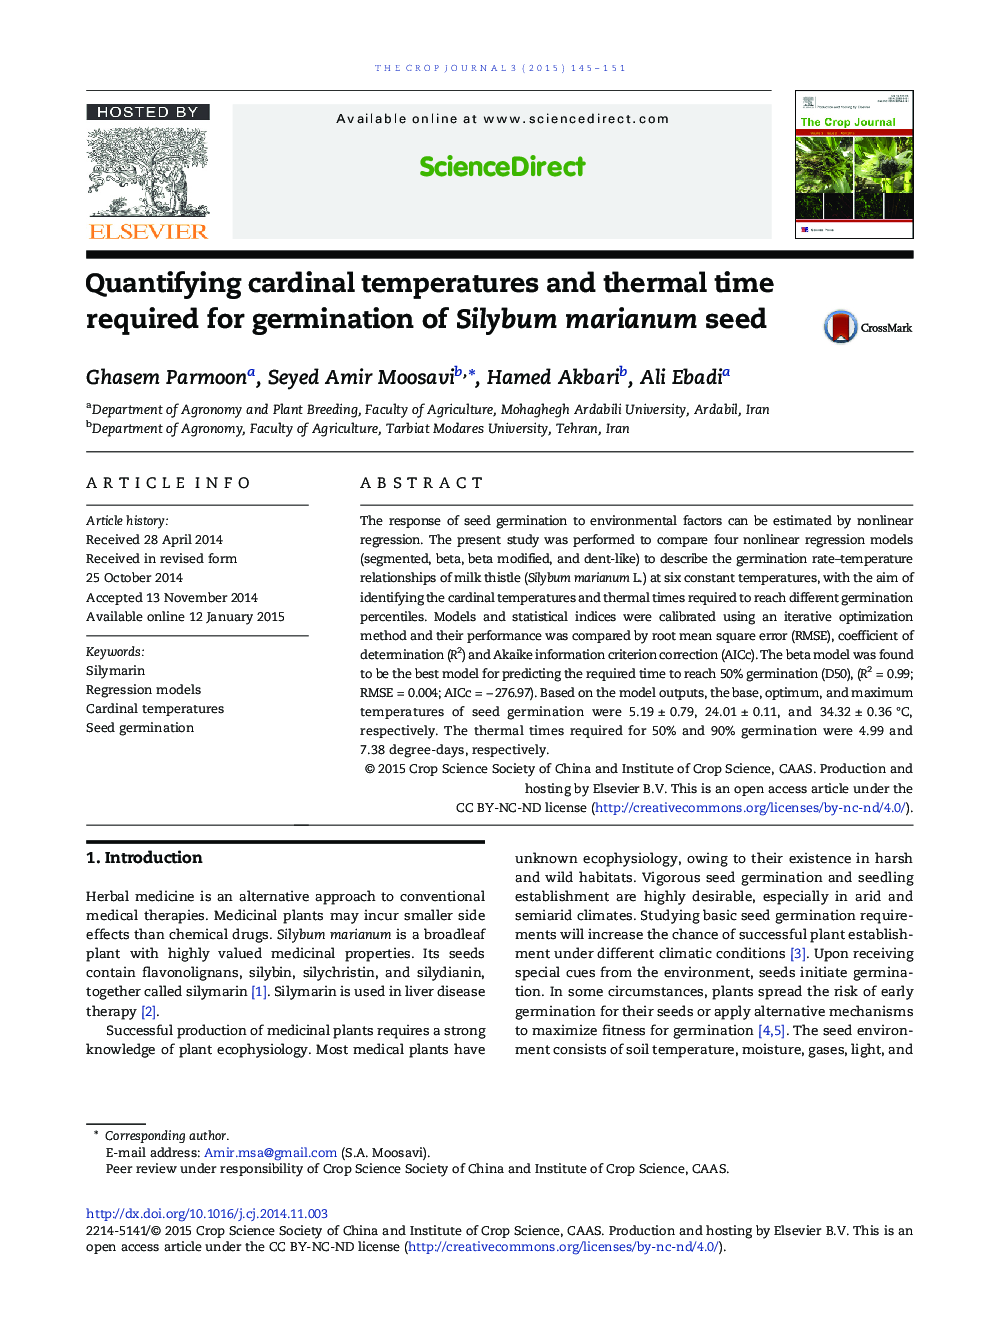 Quantifying cardinal temperatures and thermal time required for germination of Silybum marianum seed